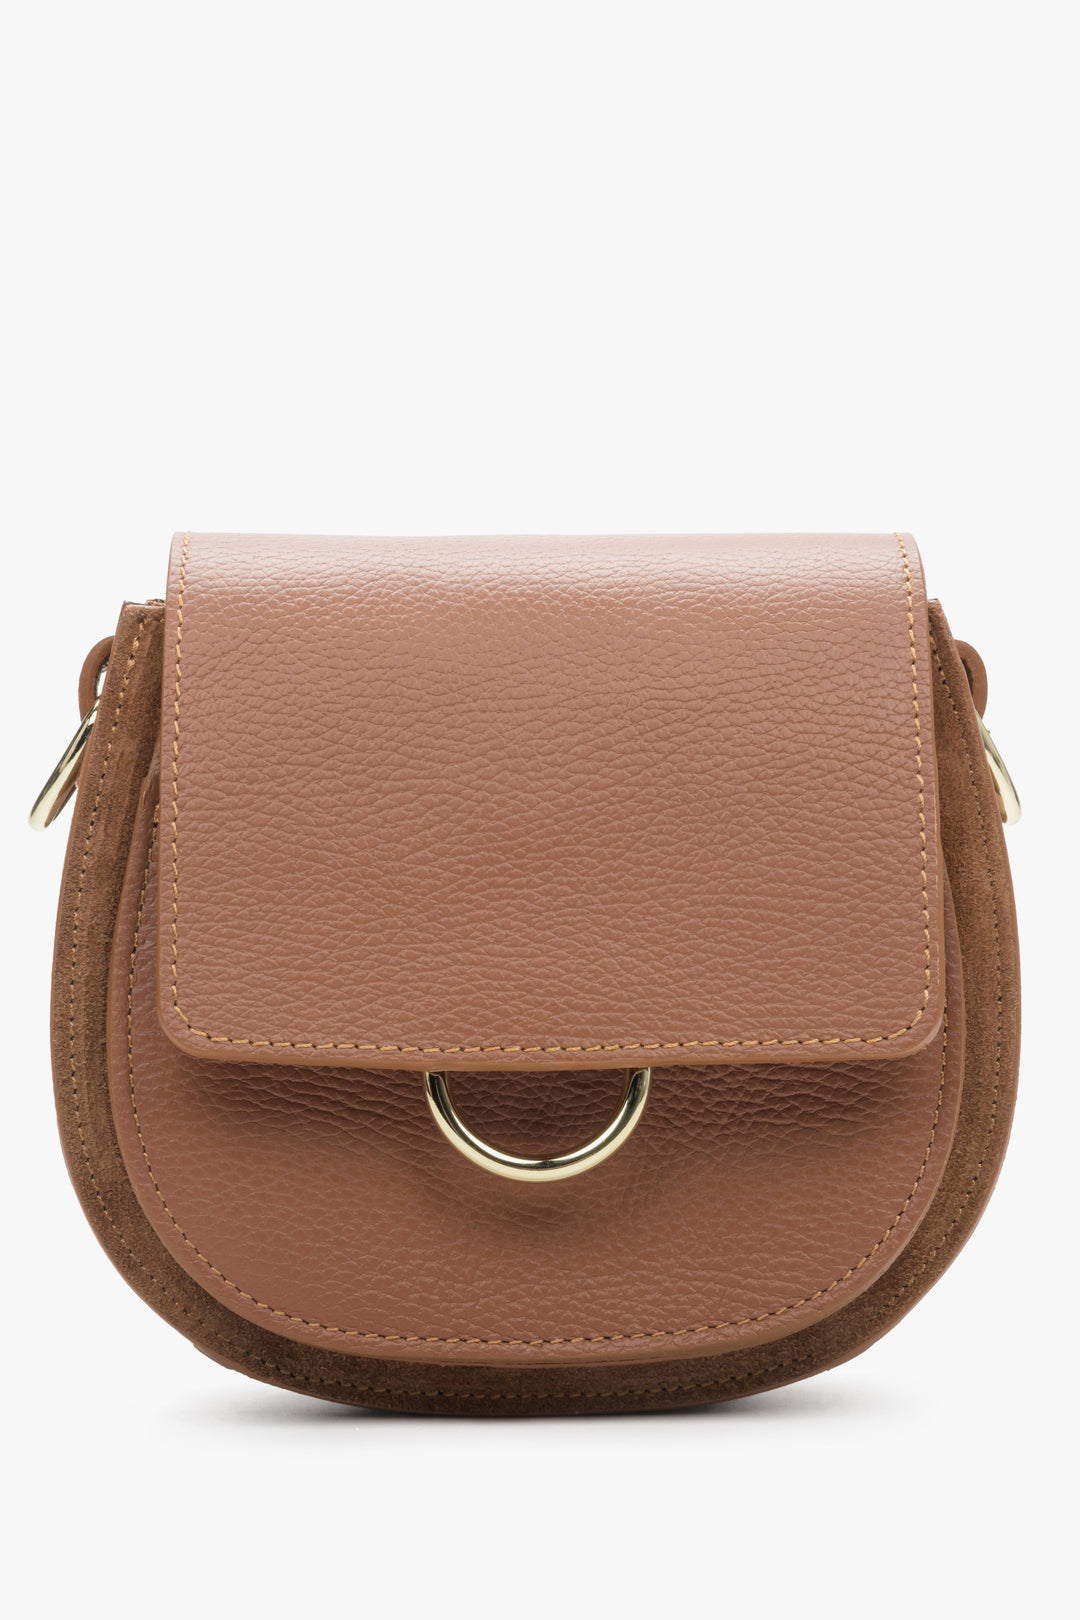 Women's brown crossbody bag made in Italy.